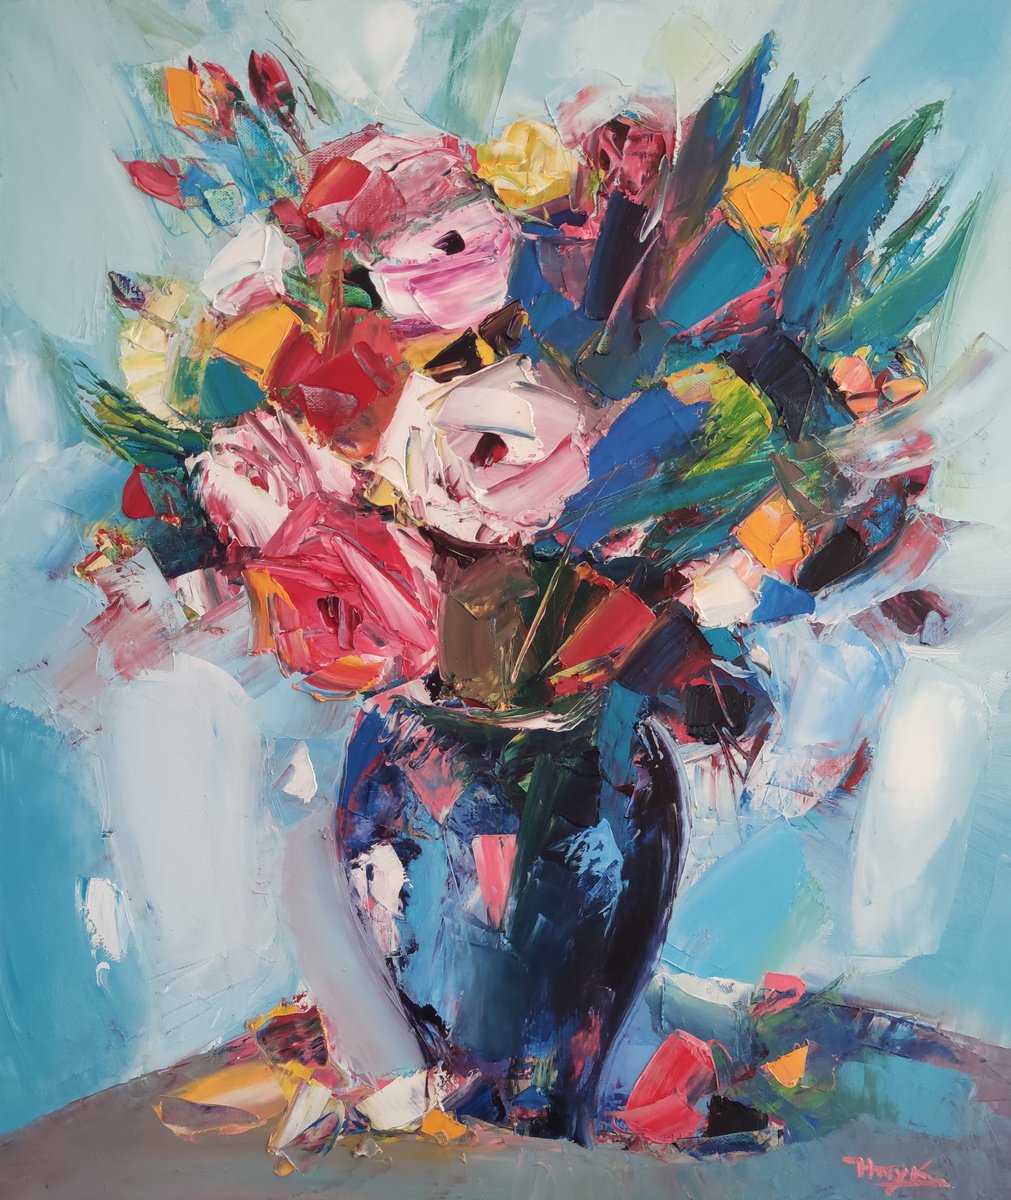 Colorful roses-2 (60x70cm, oil painting, ready to hang) by Hayk Miqayelyan